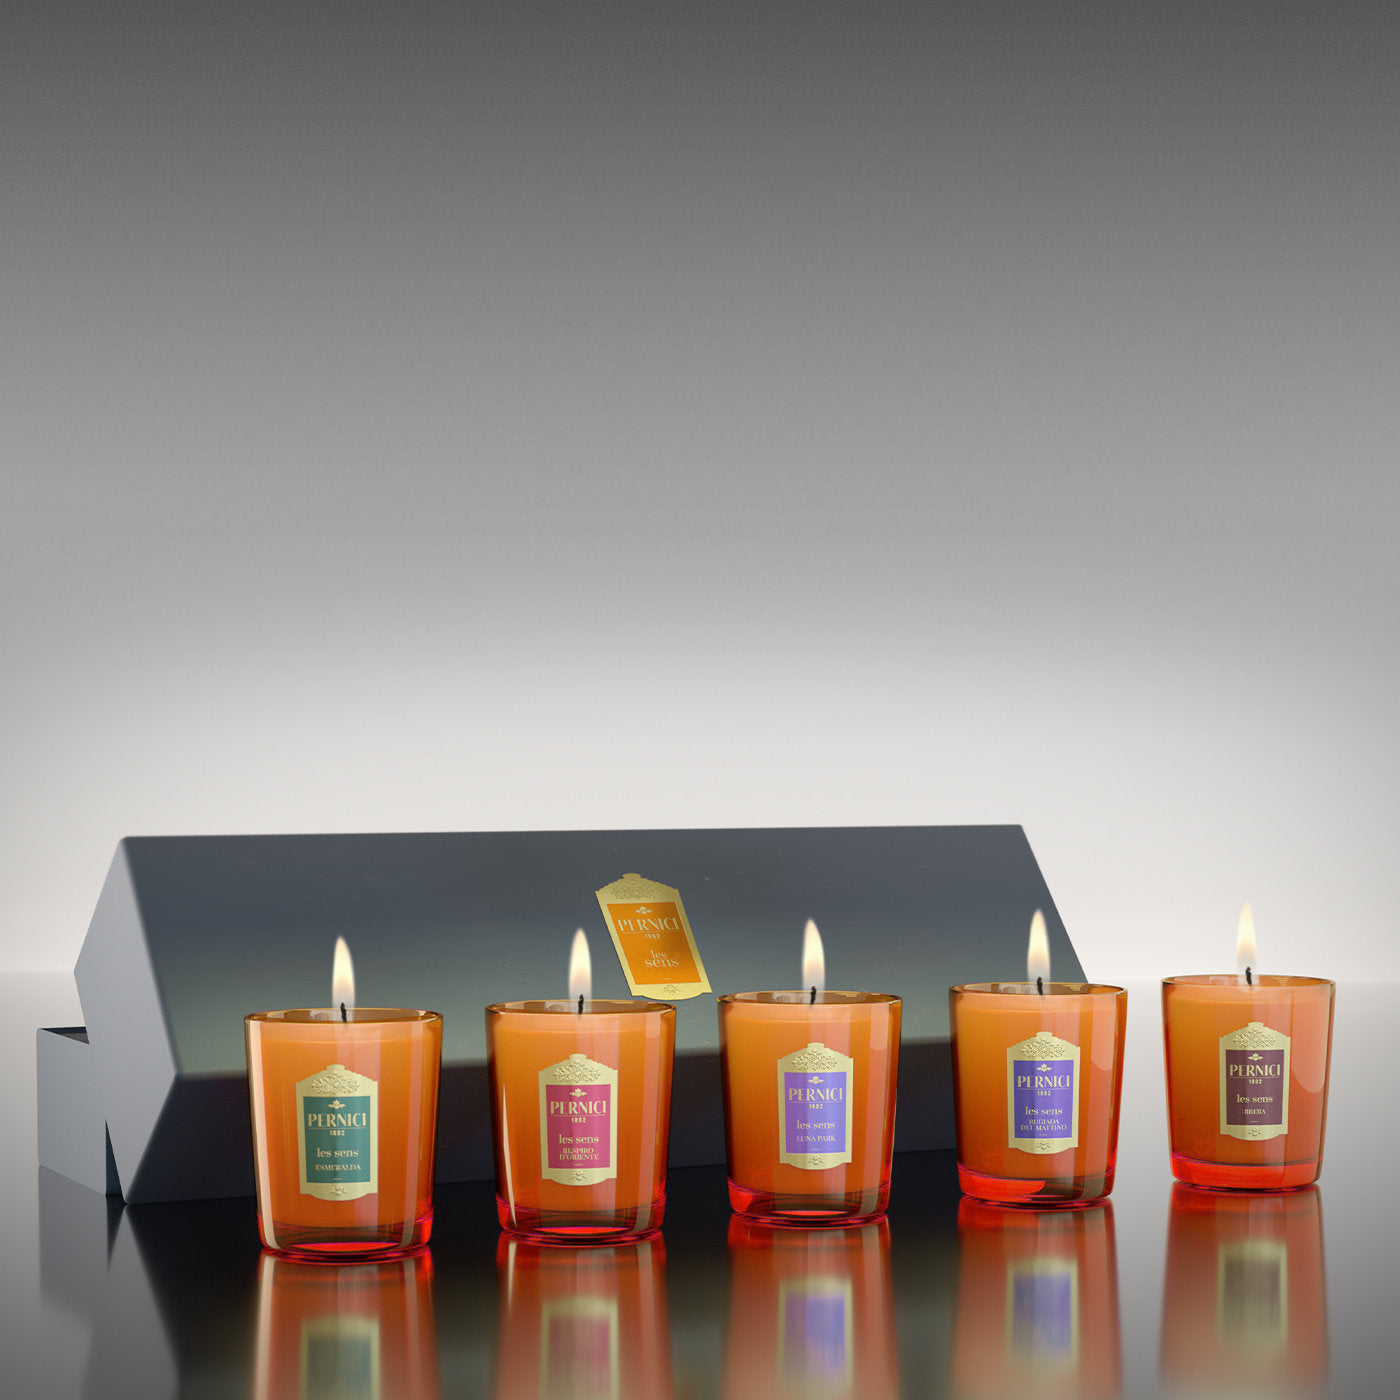 Les Sens Set of 5 Small Scented Candles - Alternative view 1